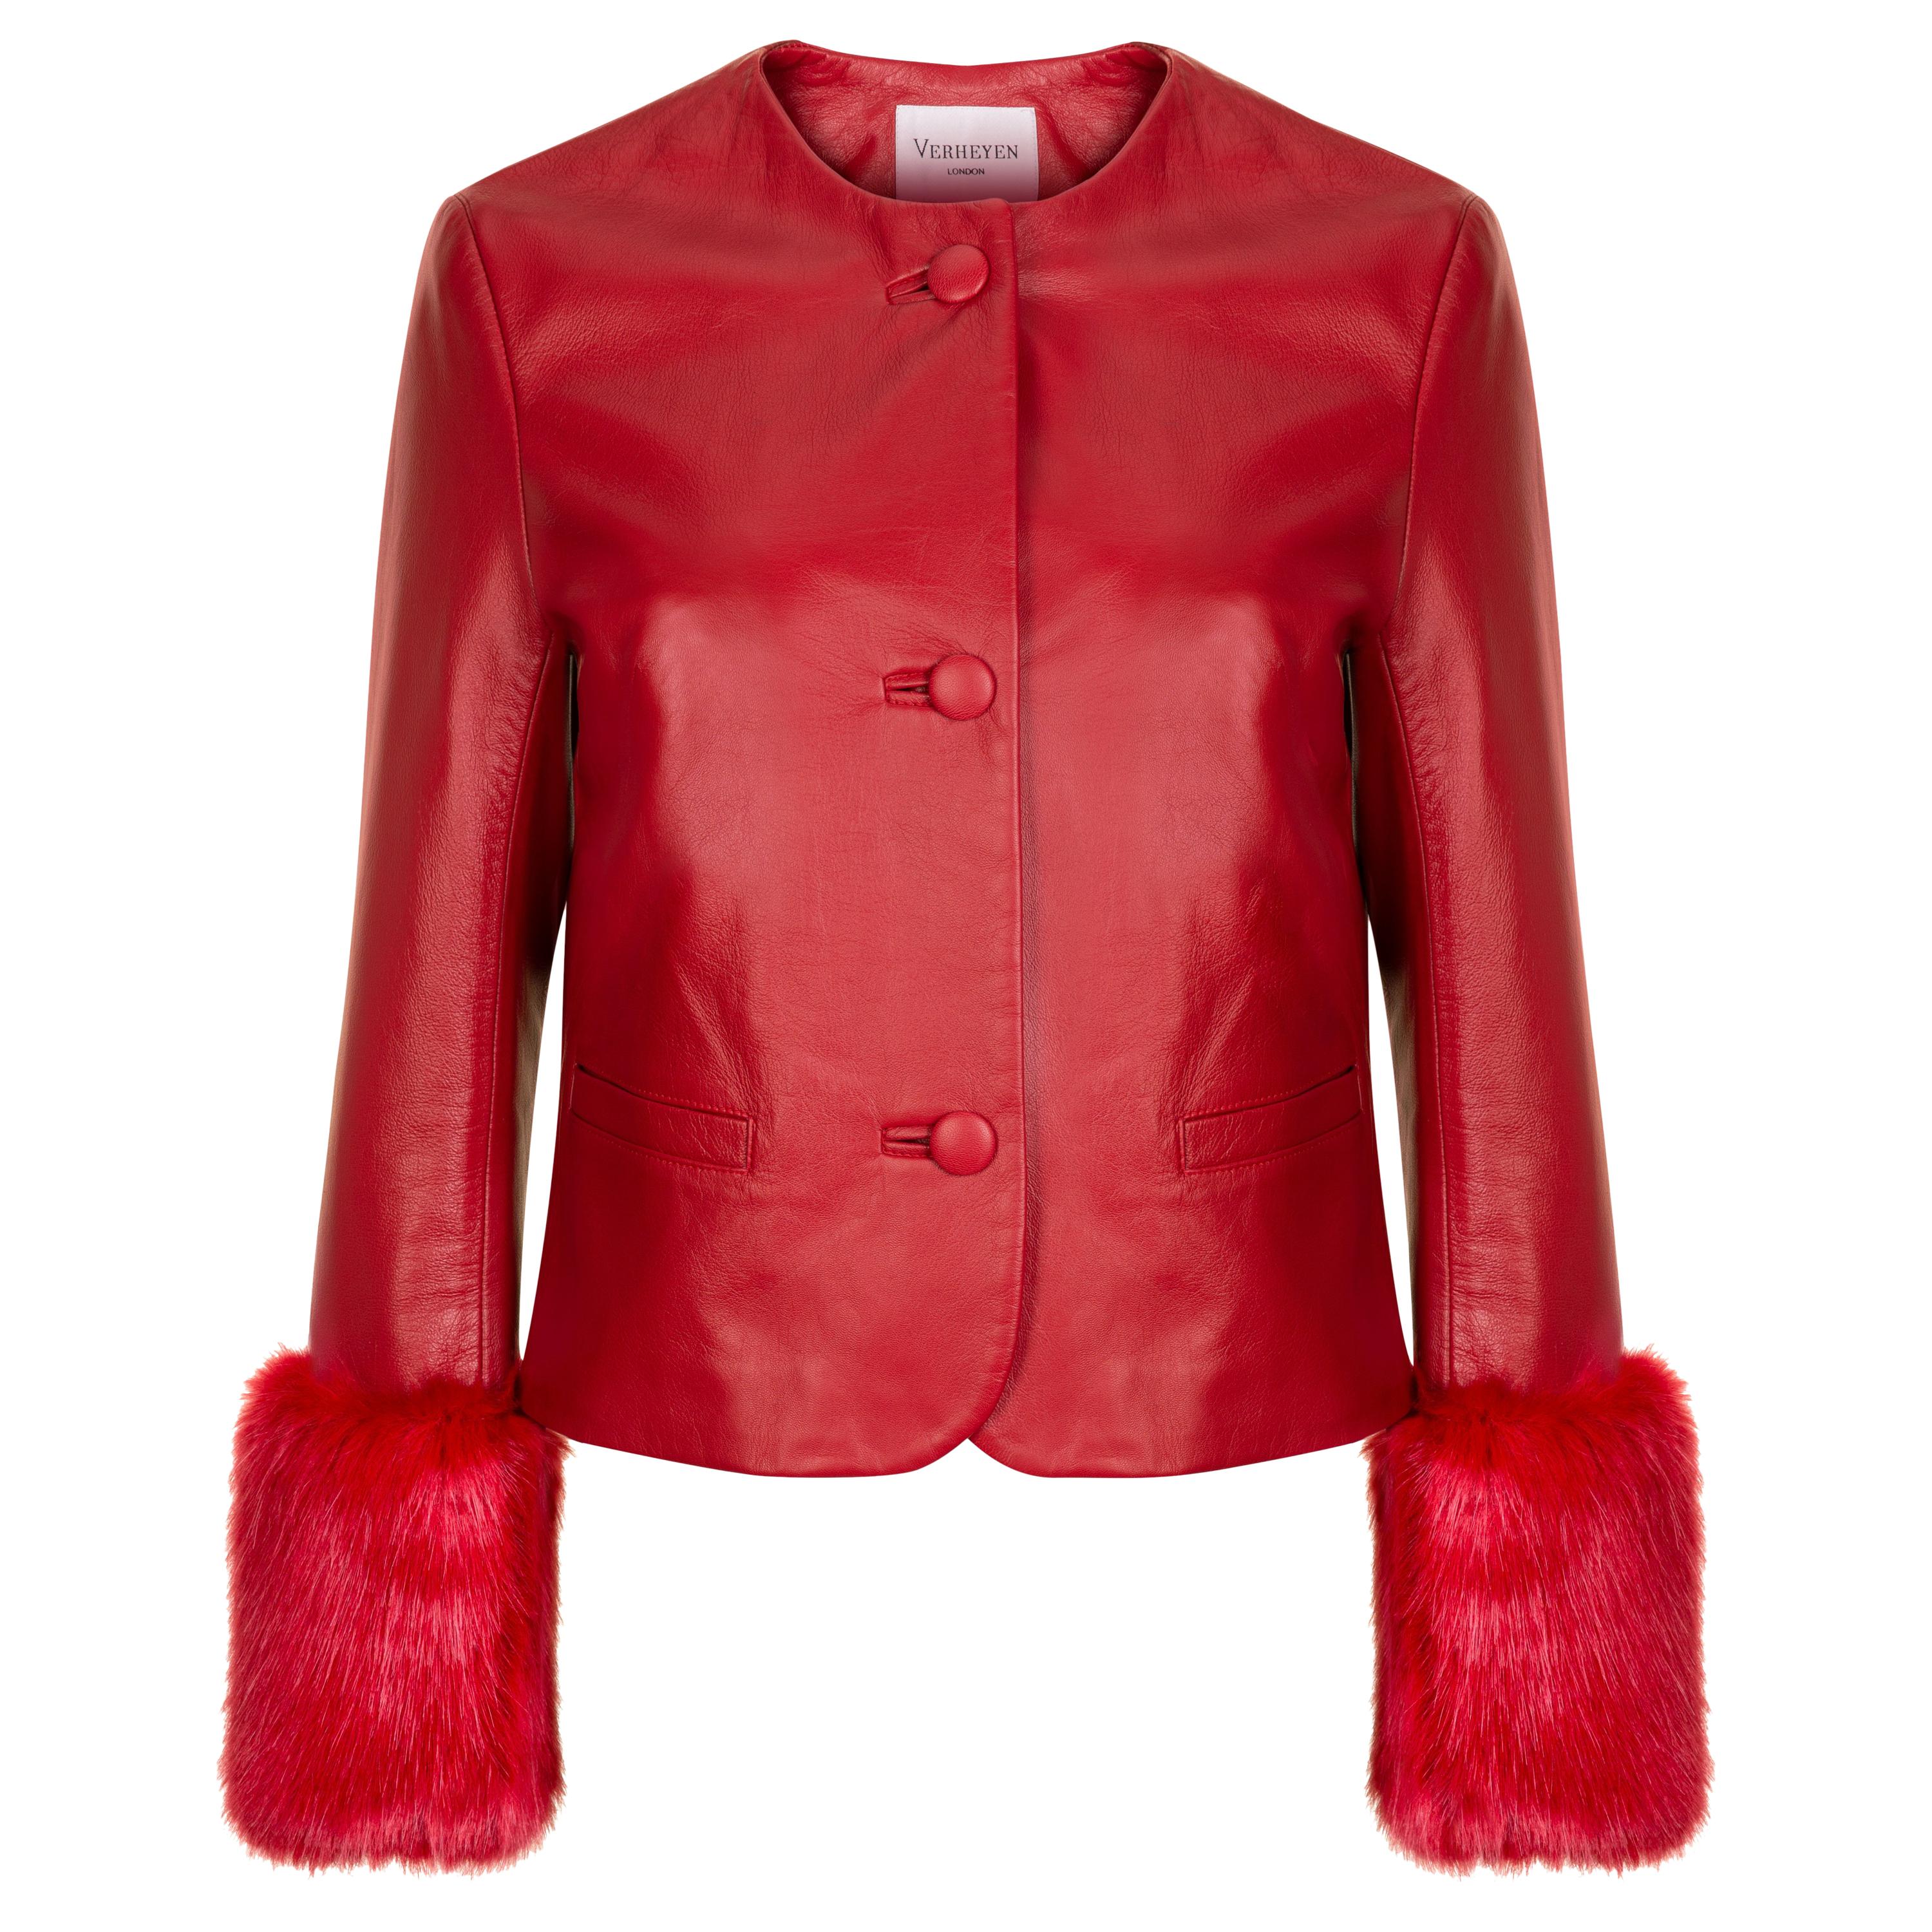 Verheyen Vita Cropped Jacket in Red Leather with Faux Fur - Size uk 8 For Sale